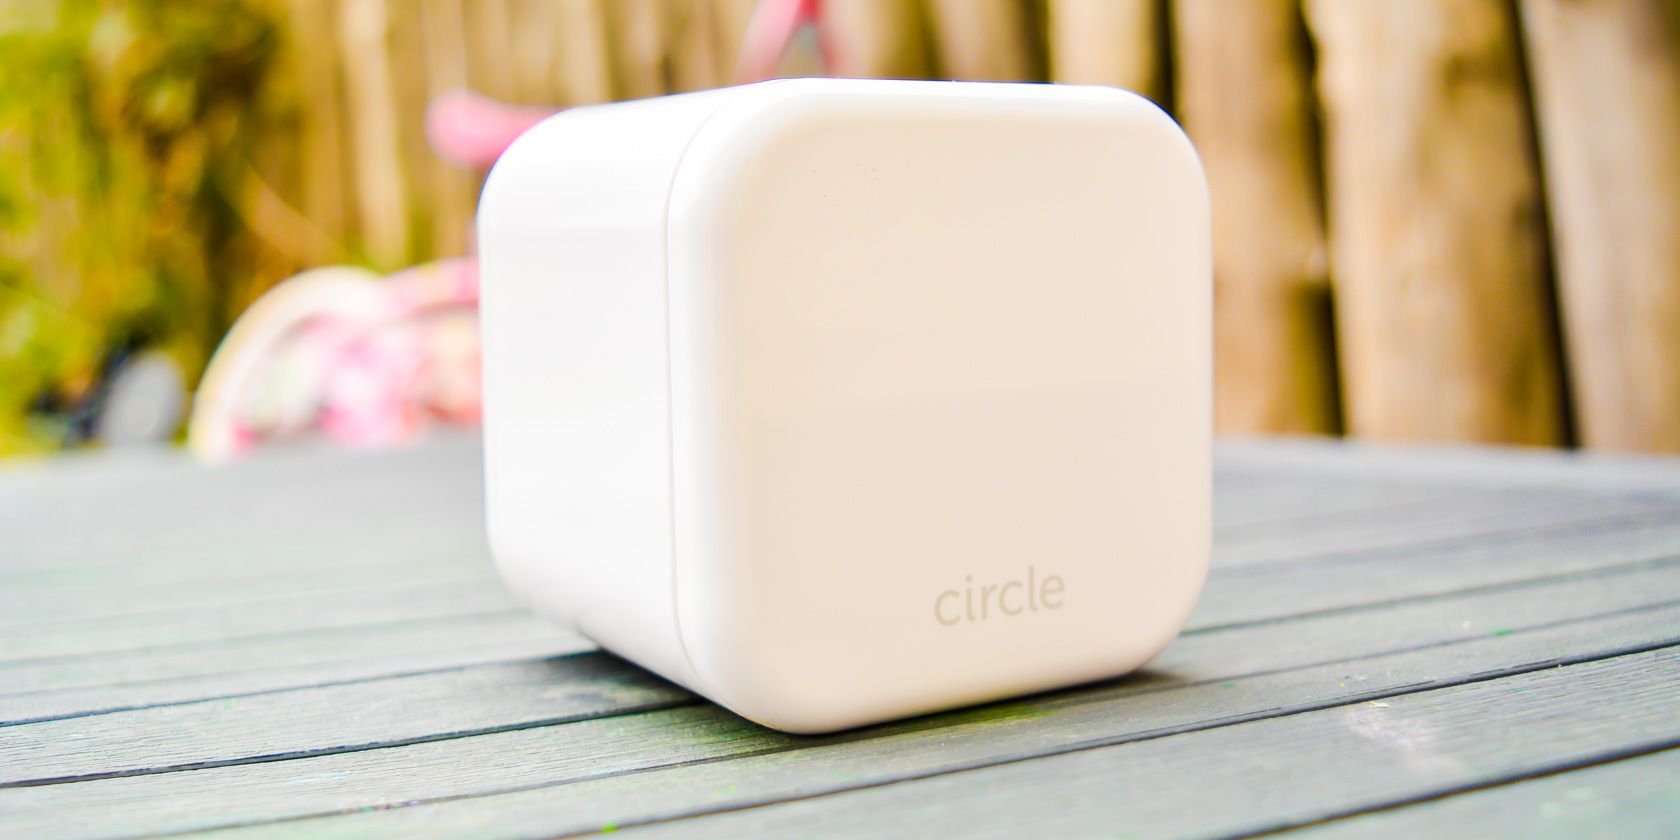 Disney's Circle Home Plus content filtering and internet monitor